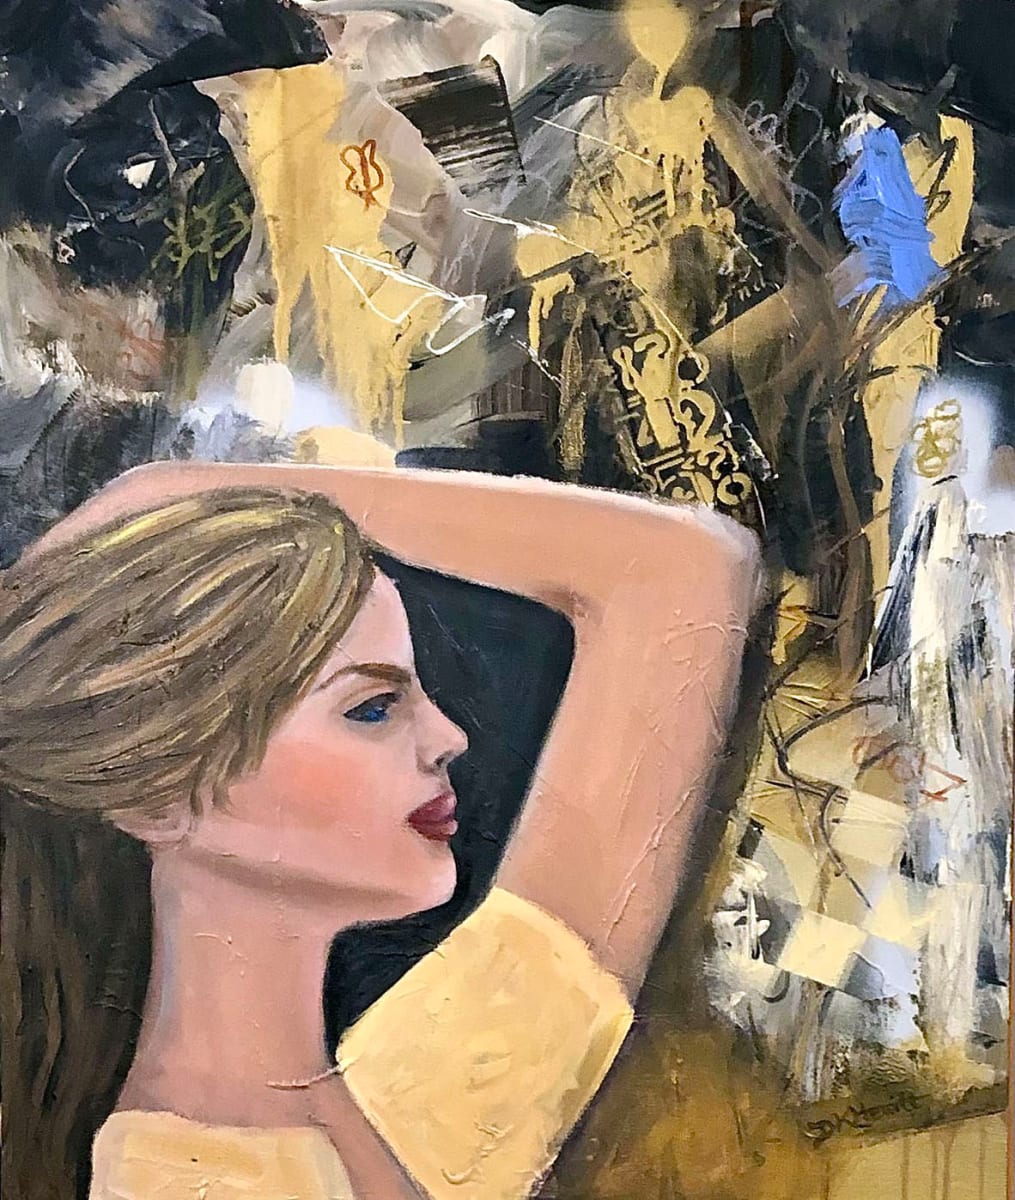 Breakthrough by Diane K. Hewitt  Image: A woman’s mind is full, yet she still manages to imagine the beauty in nature in this abstracted portrait oil painting by Georgia Contemporary Artist Diane K. Hewitt. 